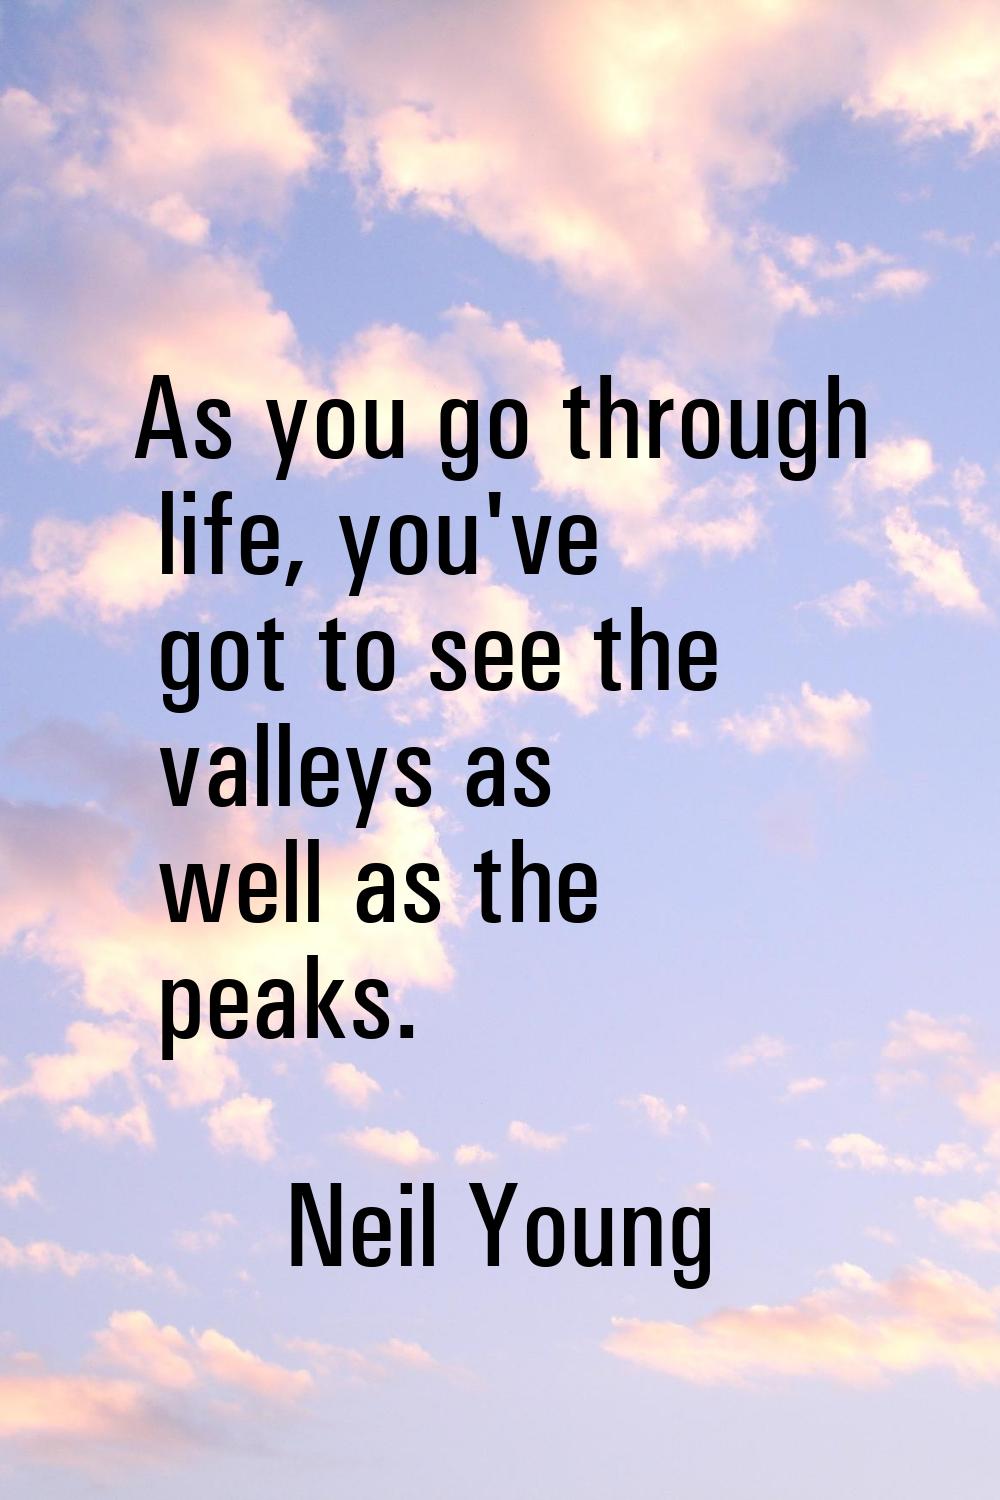 As you go through life, you've got to see the valleys as well as the peaks.